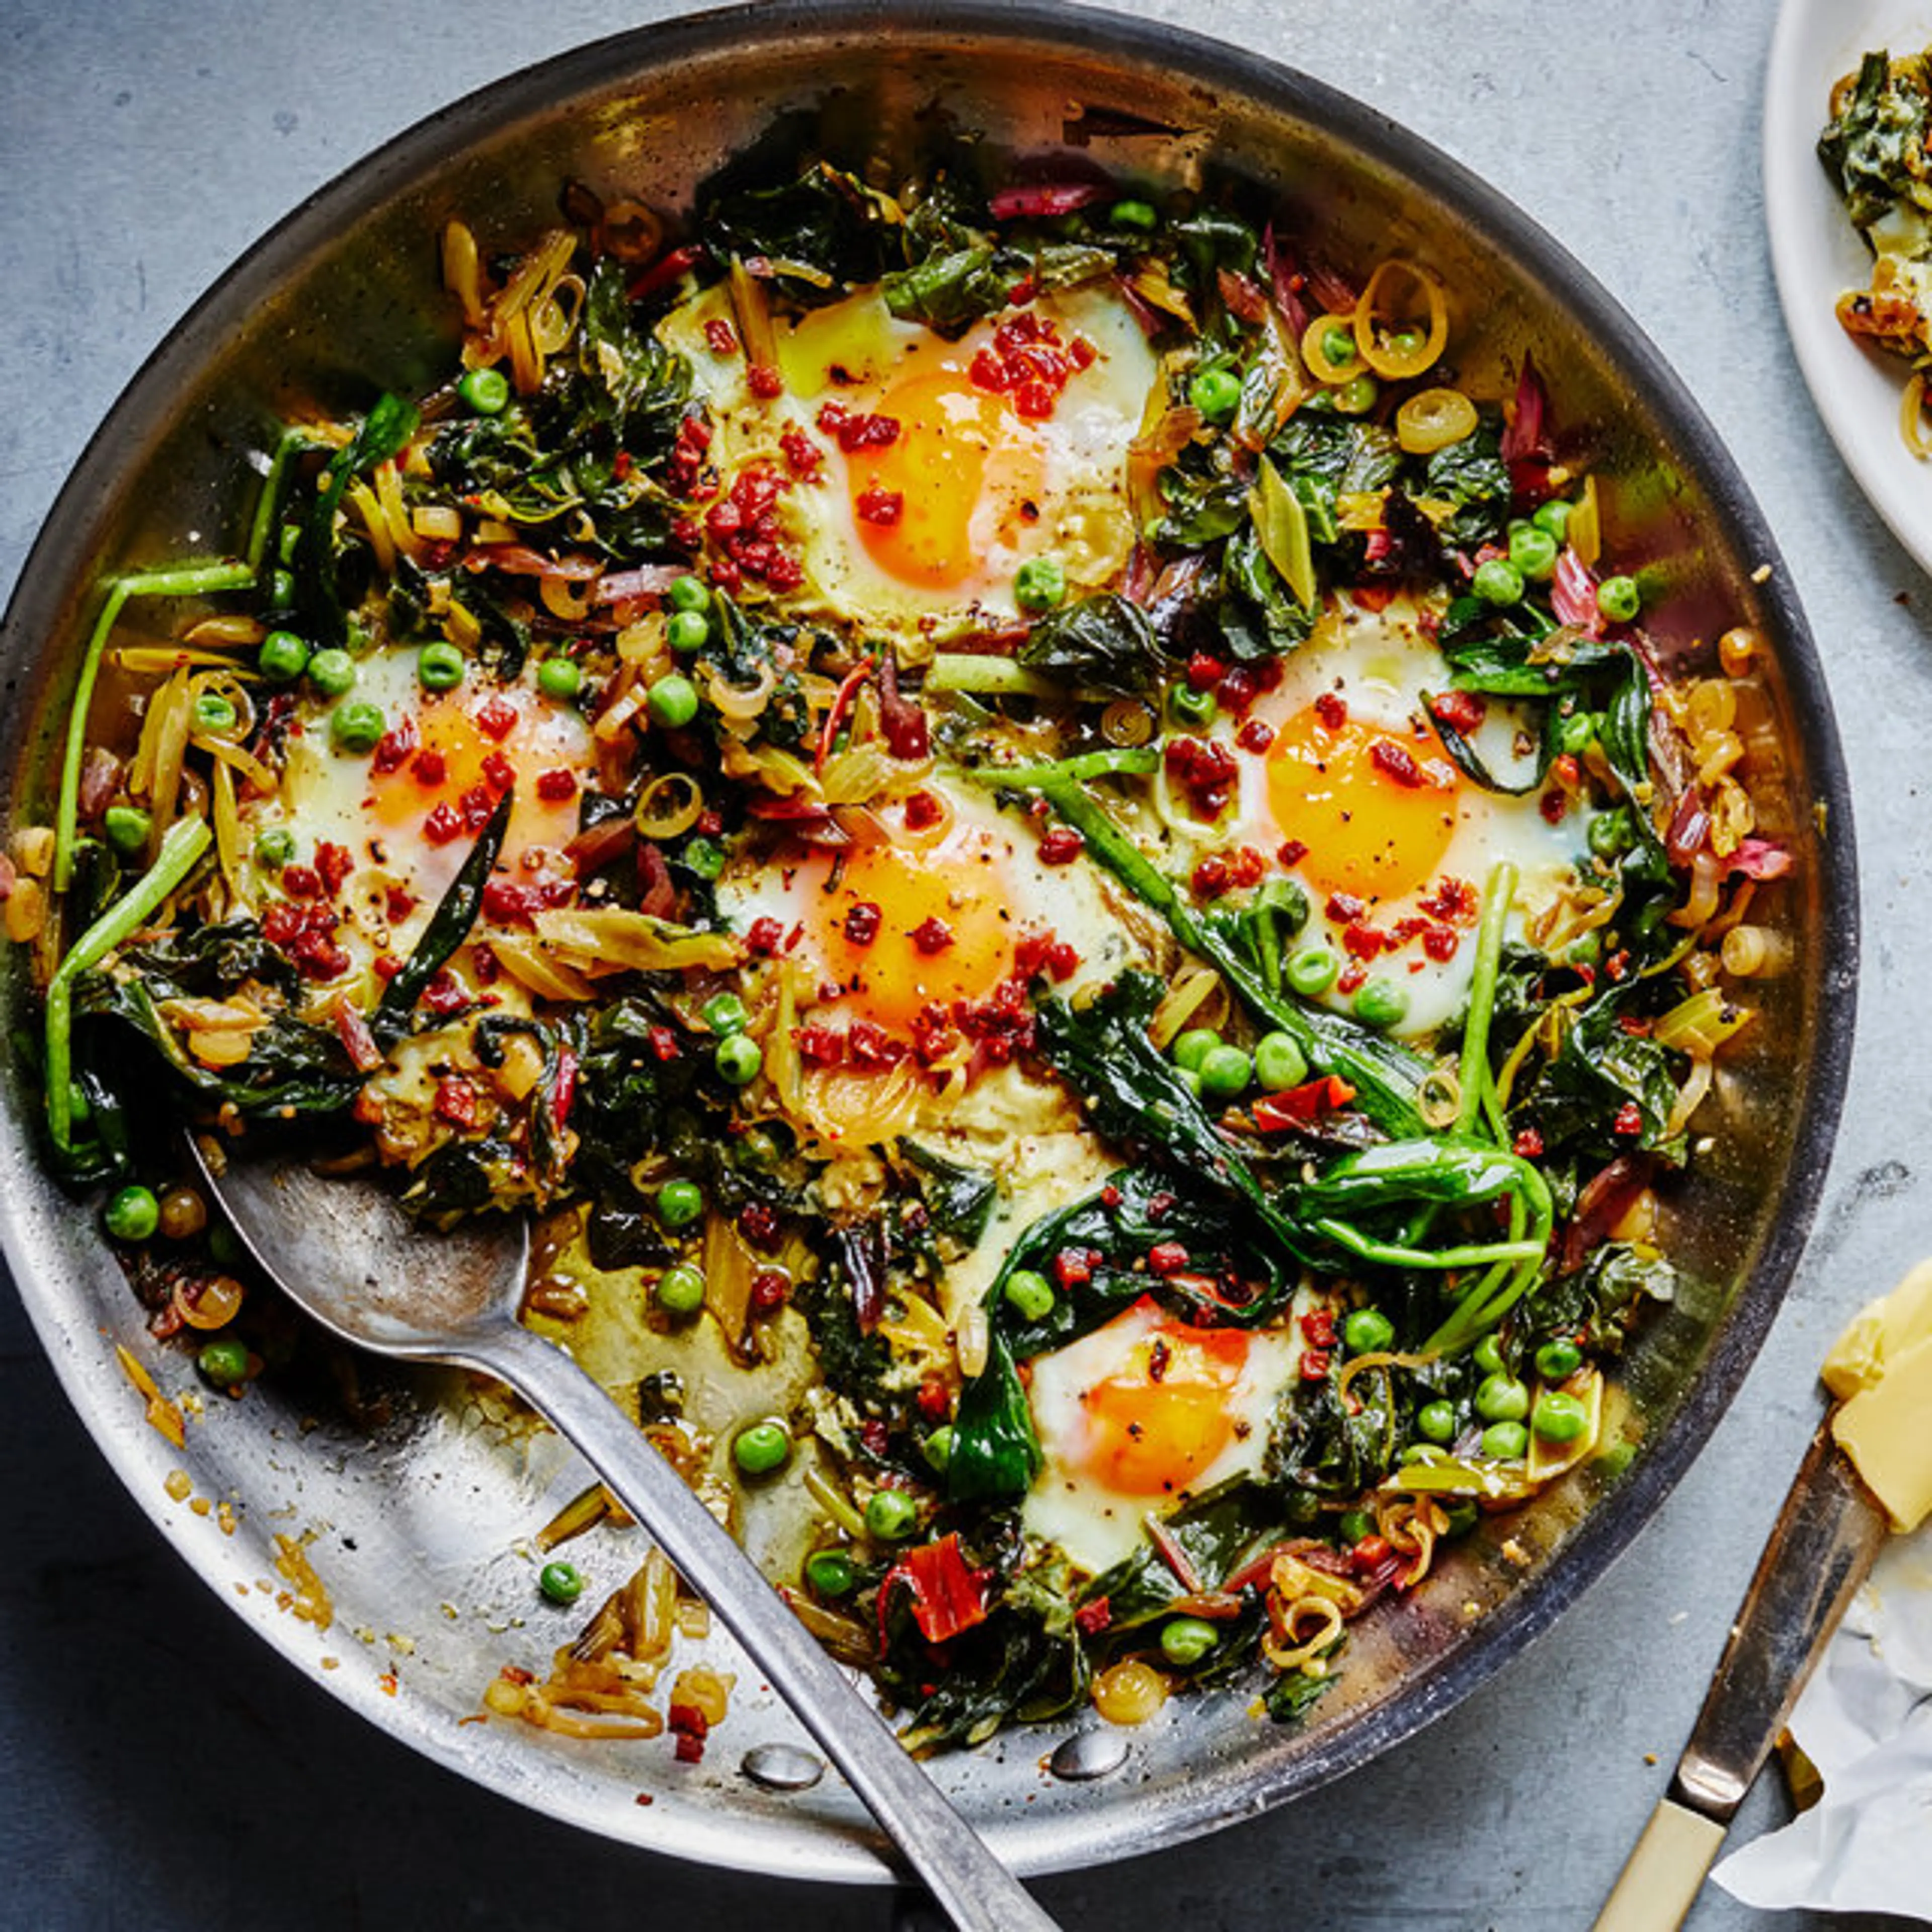 Skillet Greens With Runny Eggs, Peas and Pancetta